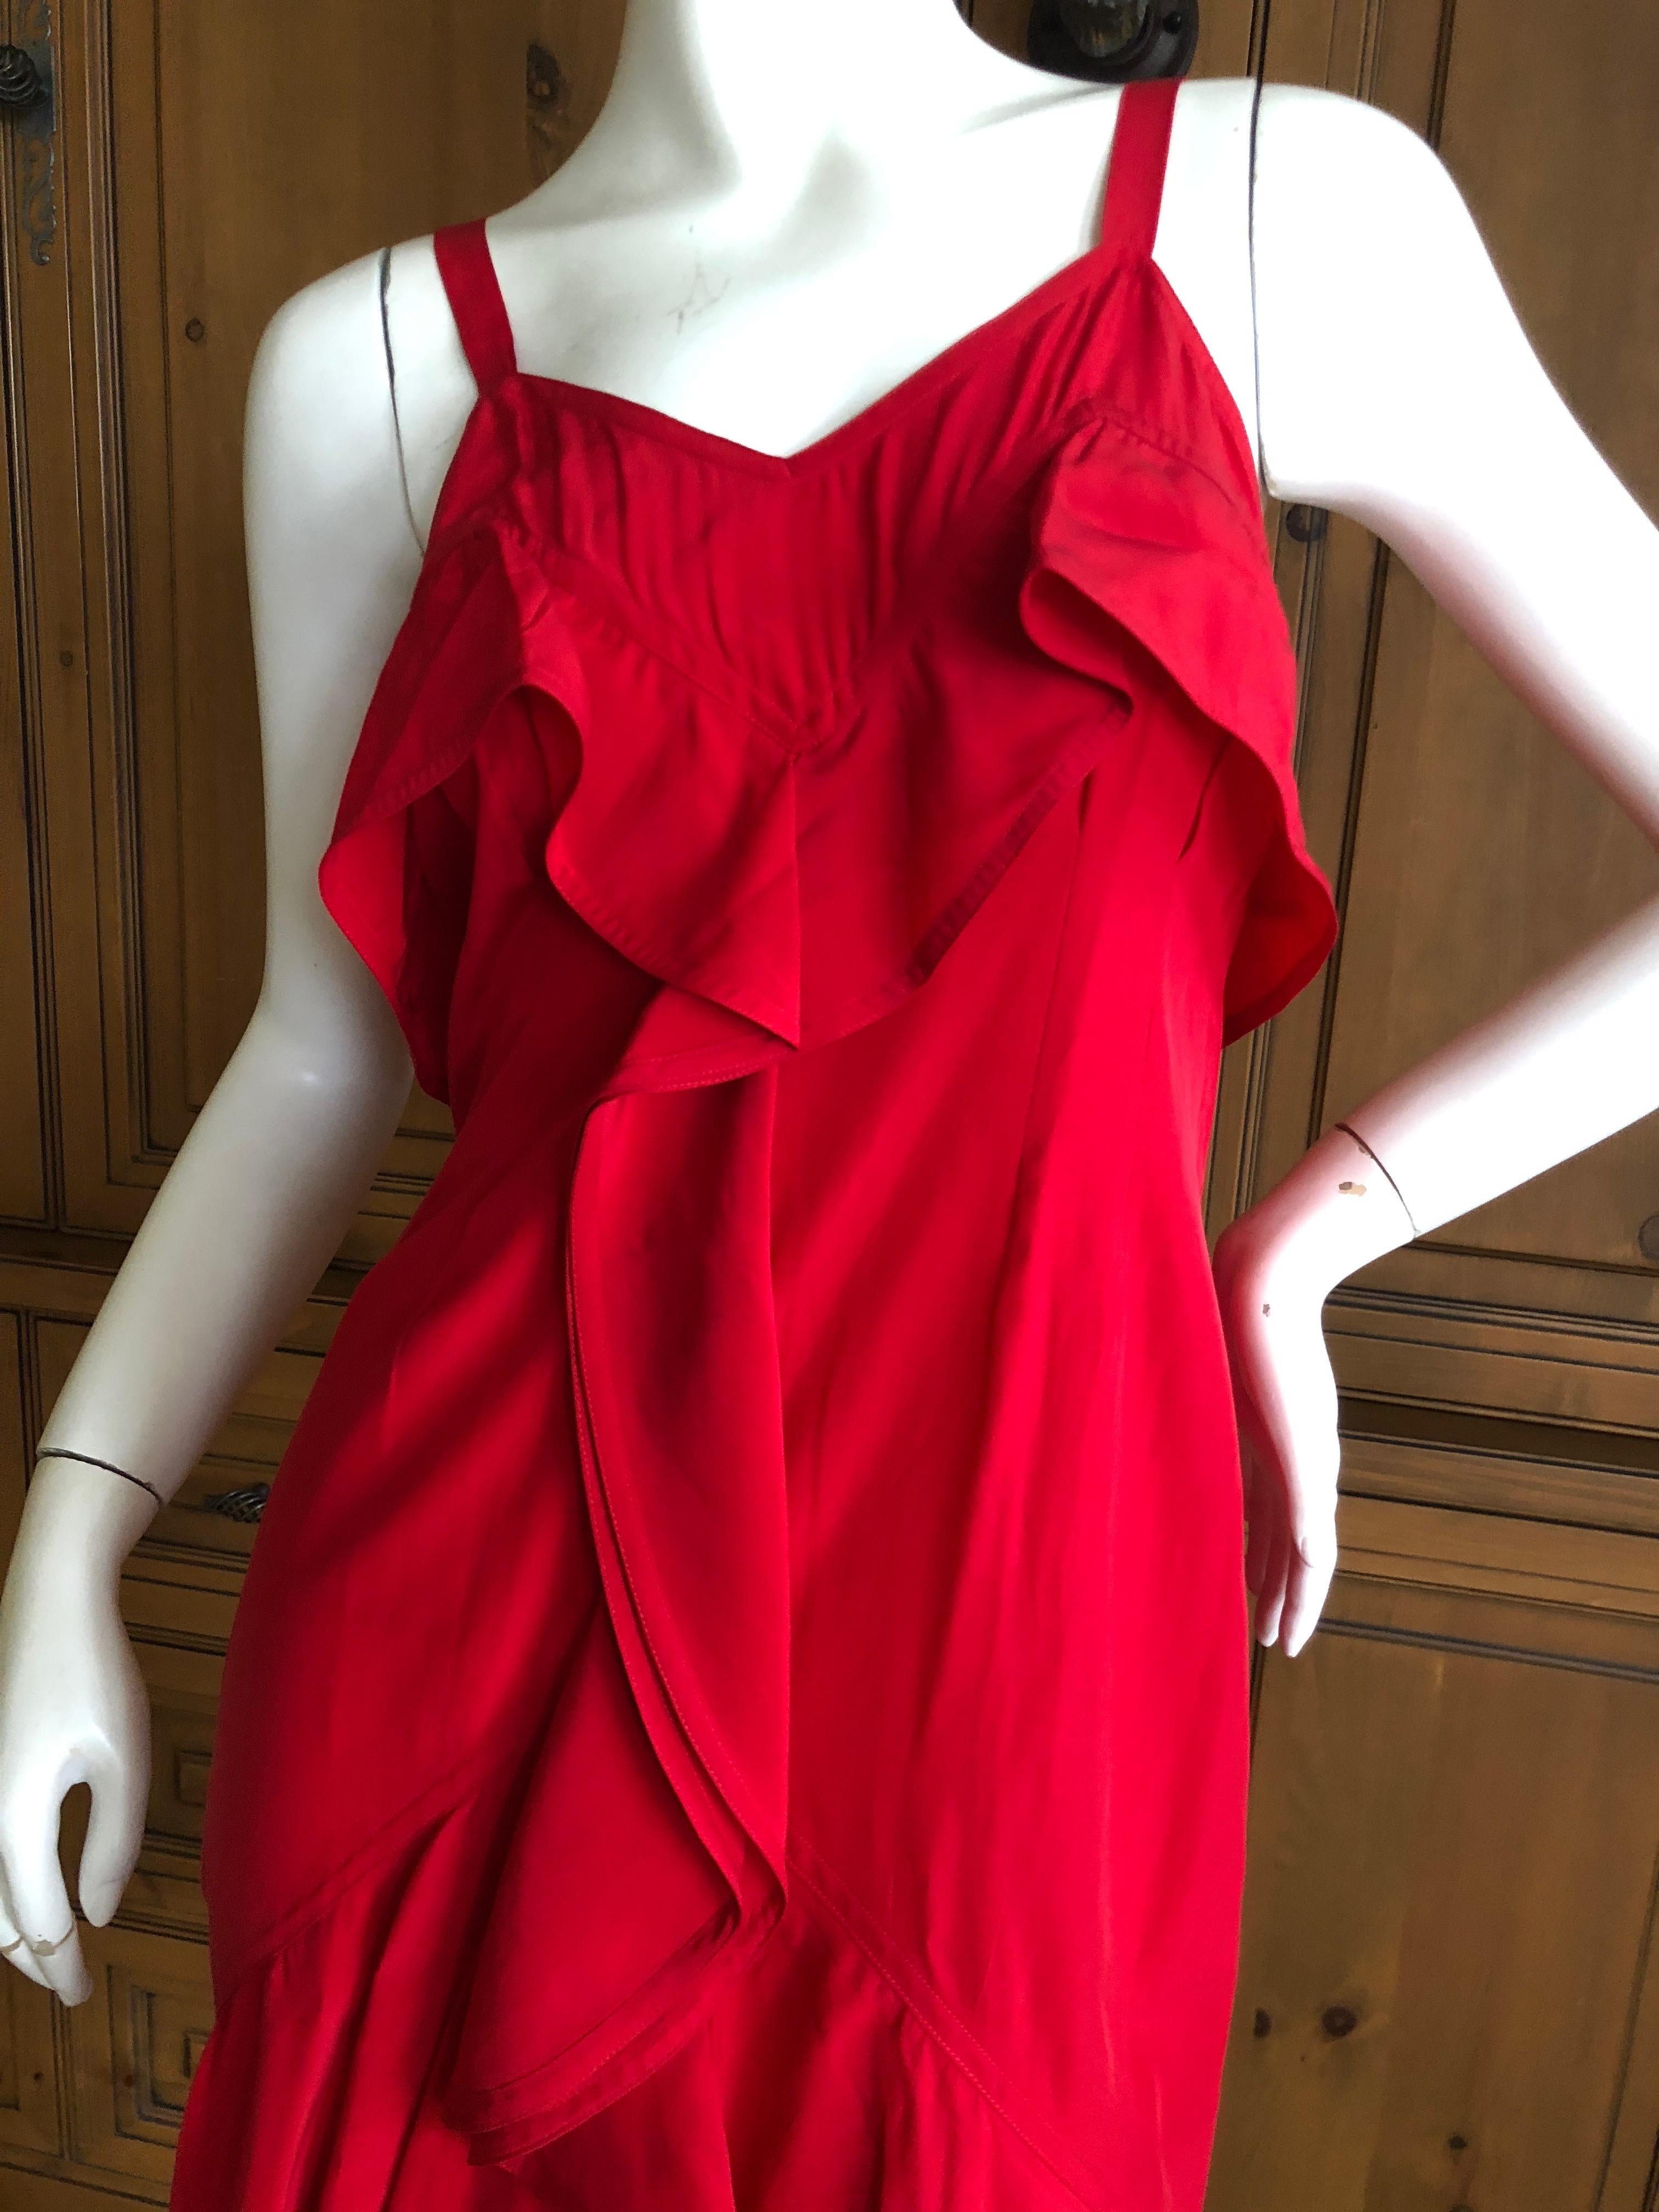 Yves Saint Laurent Tom Ford Fall 2003 Look 1 Red Ruffle Dress For Sale 1